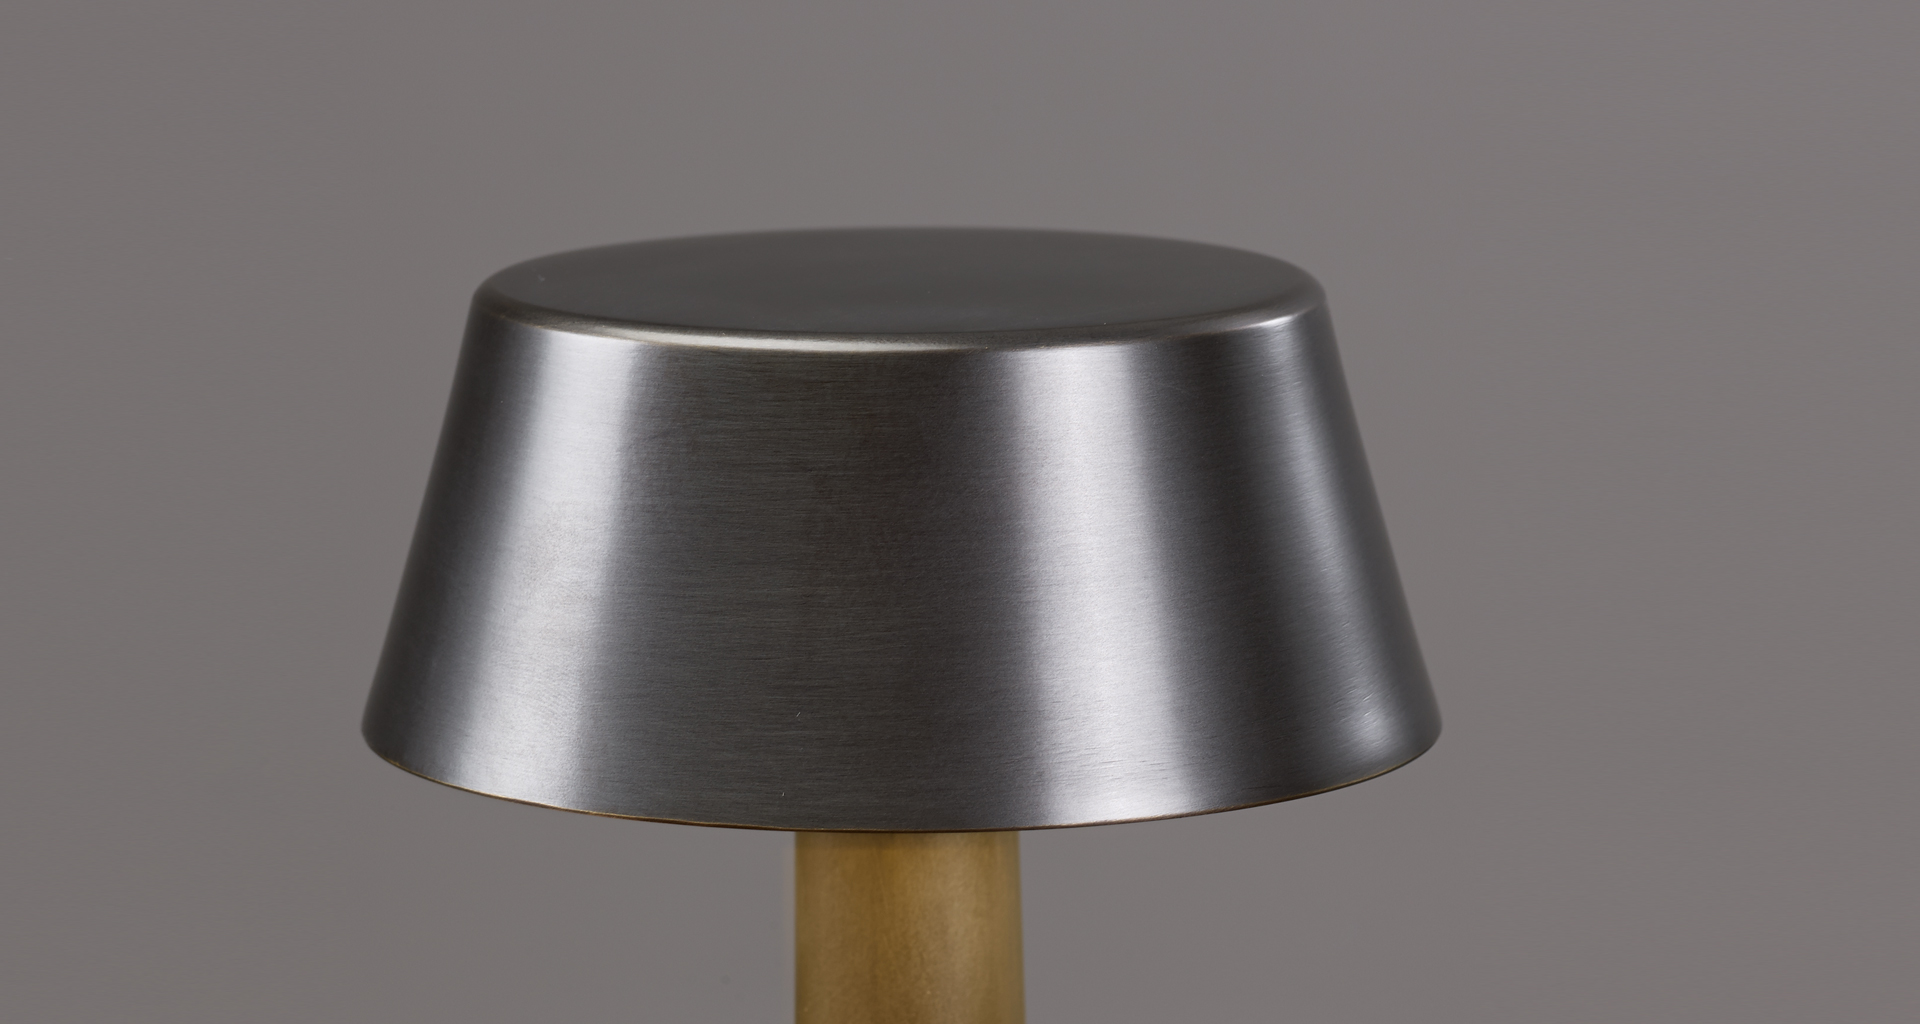 Detail of Fiammetta, a portable table LED lamp with bronze structure and touch switch, from Promemoria's catalogue | Promemoria